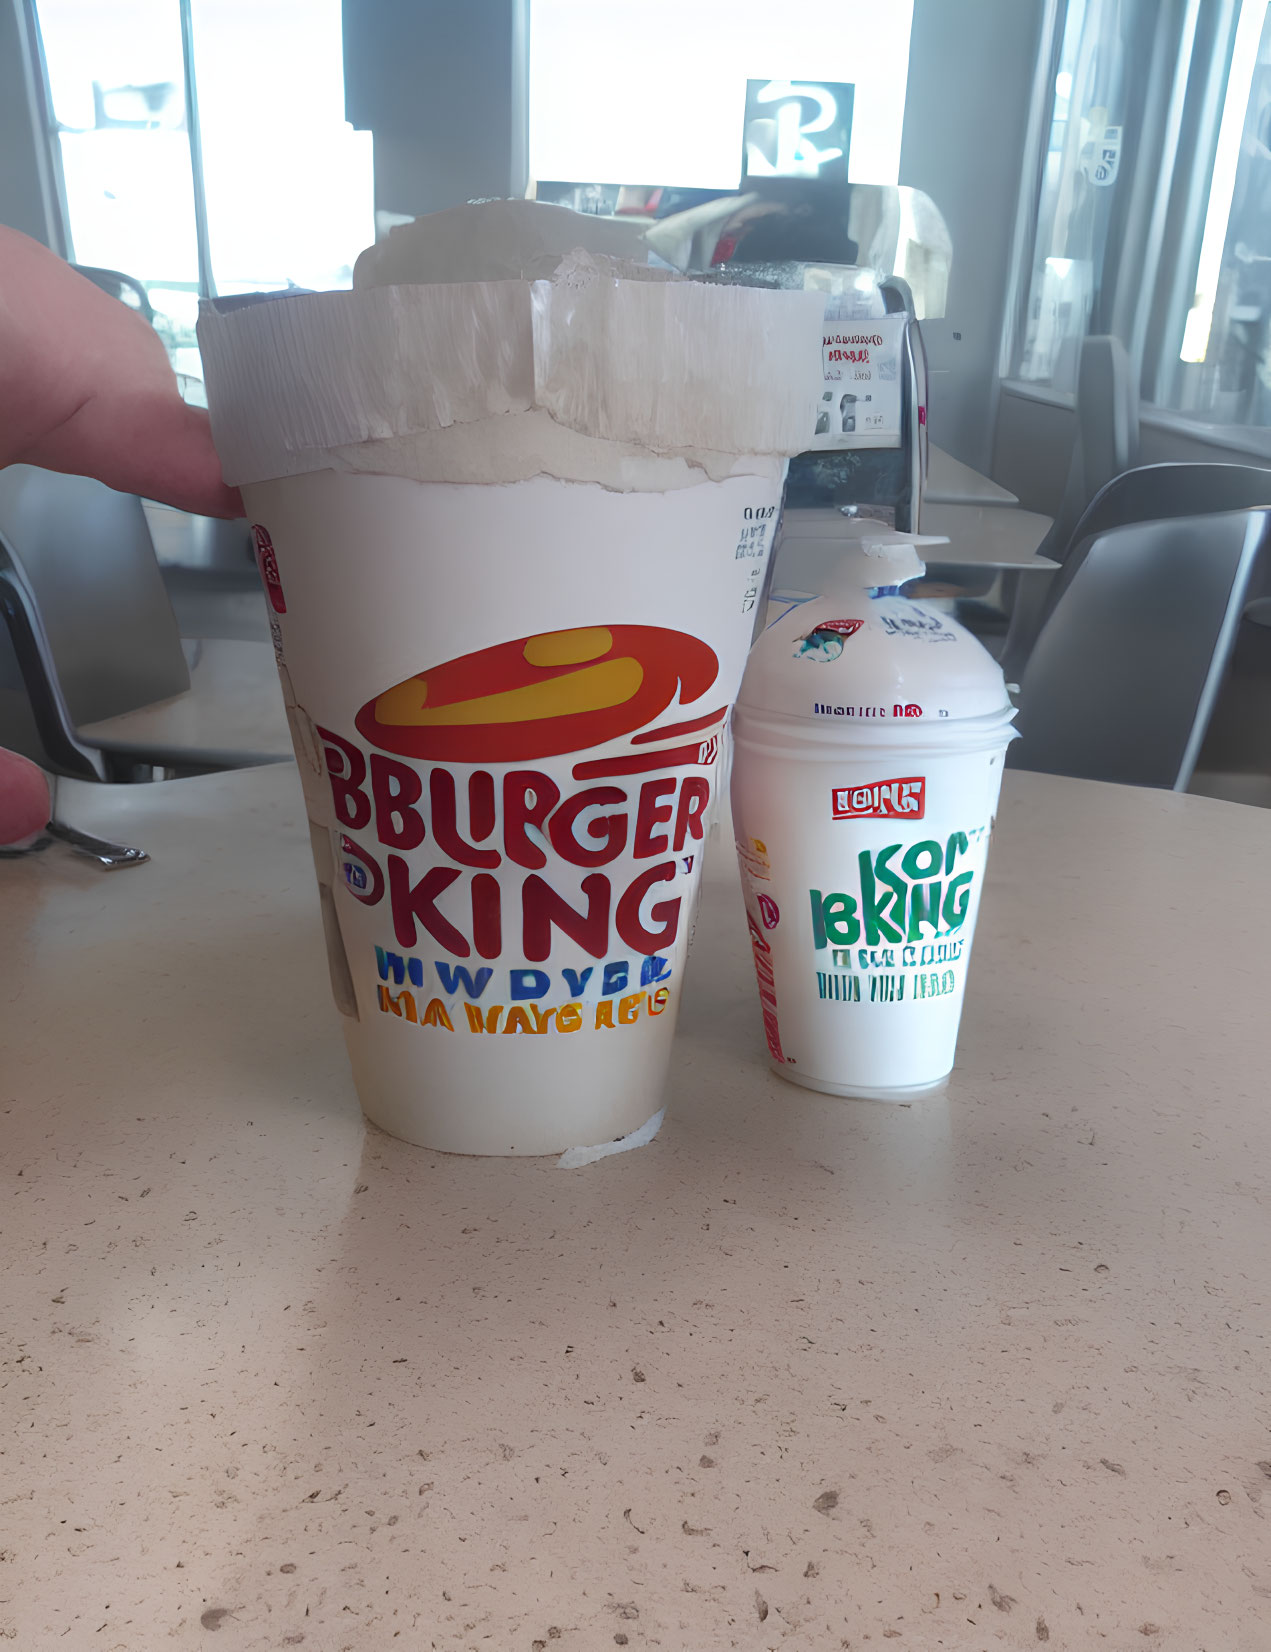 Hand holding Burger King cup with exploded top next to smaller cup on table in bright space